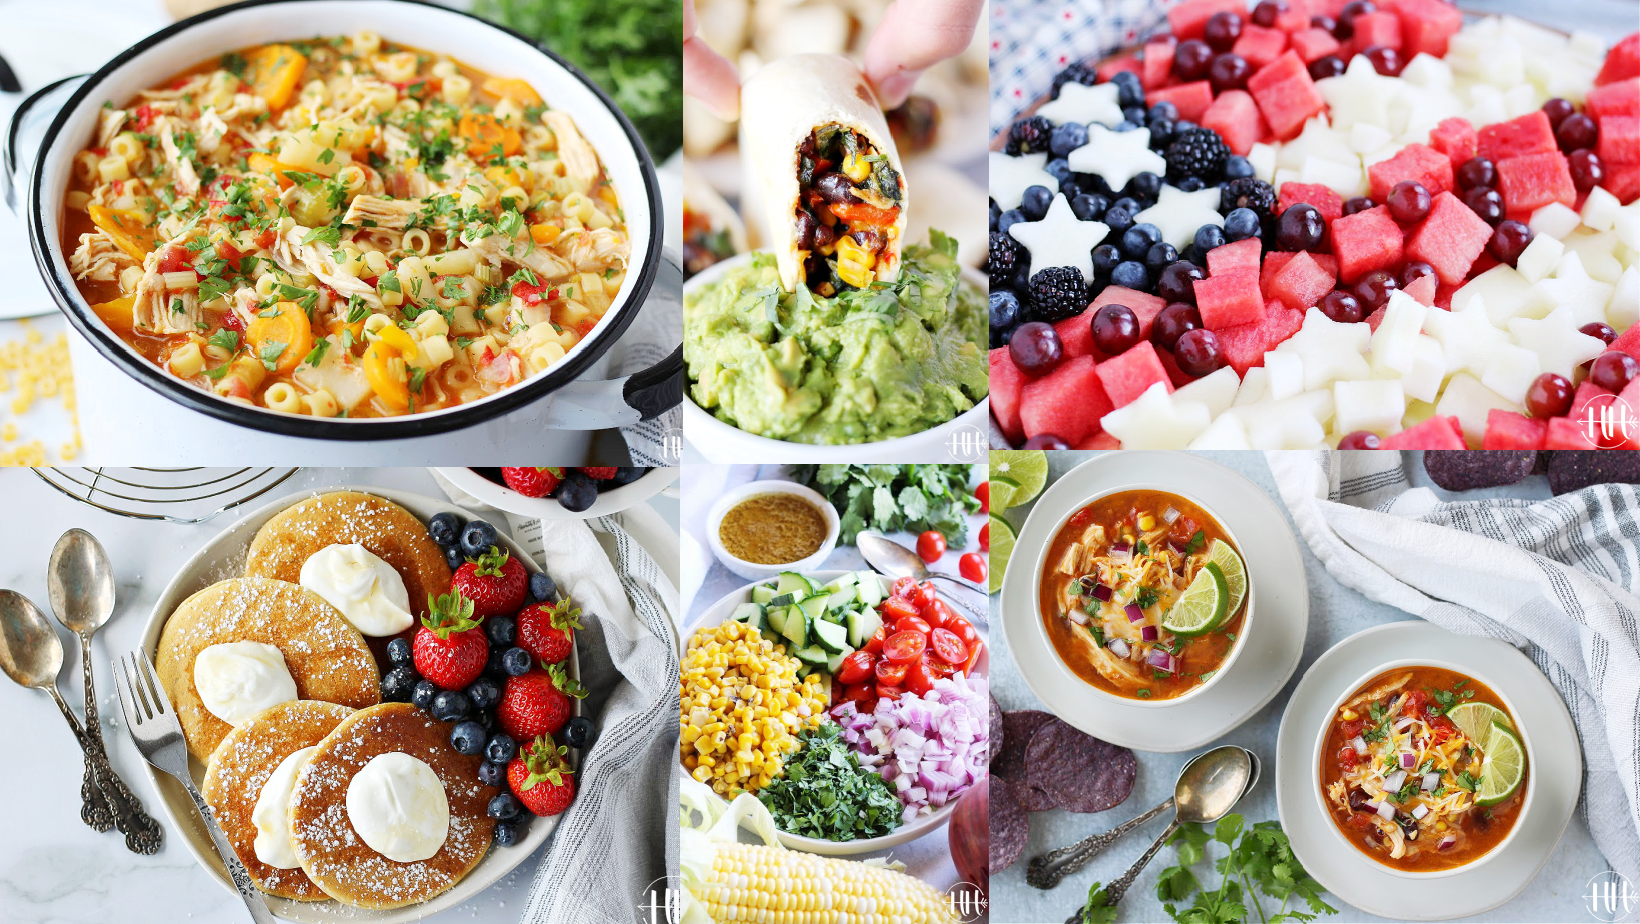 Sammi Food Photographer at HappiHomemade took these images of salads, soups, and breakfast!